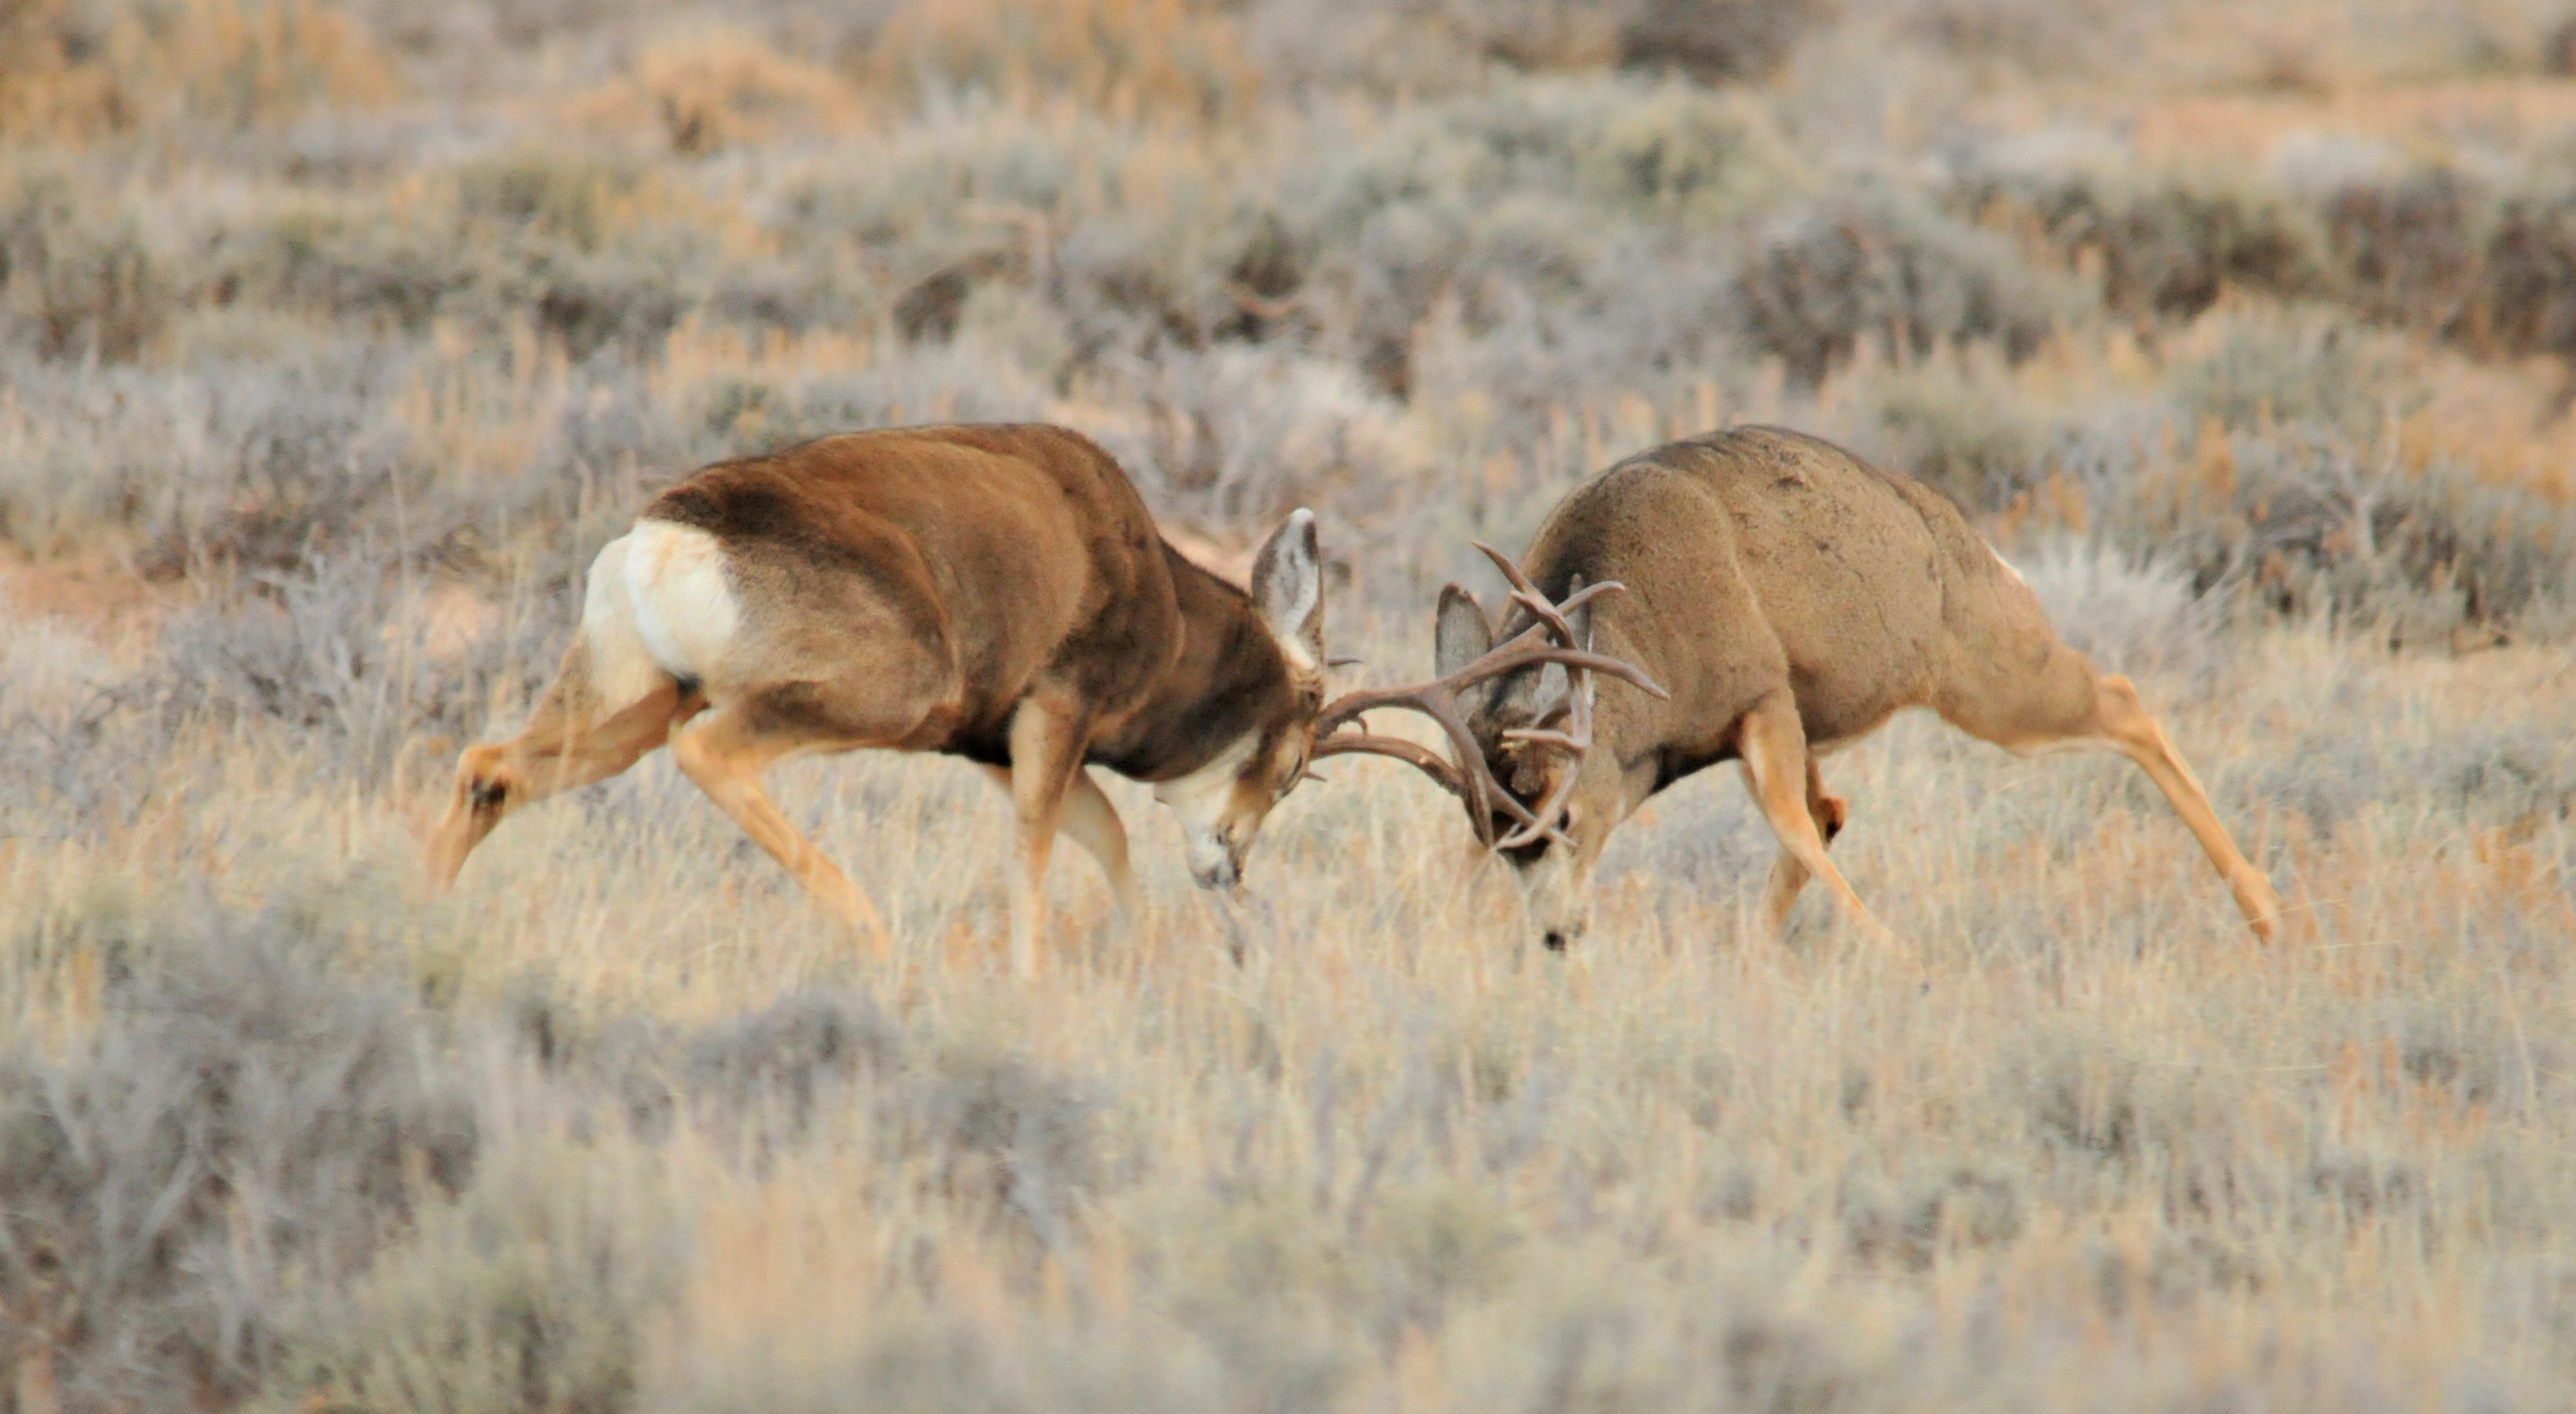 Two large brown antlered deer charge one another and butt heads